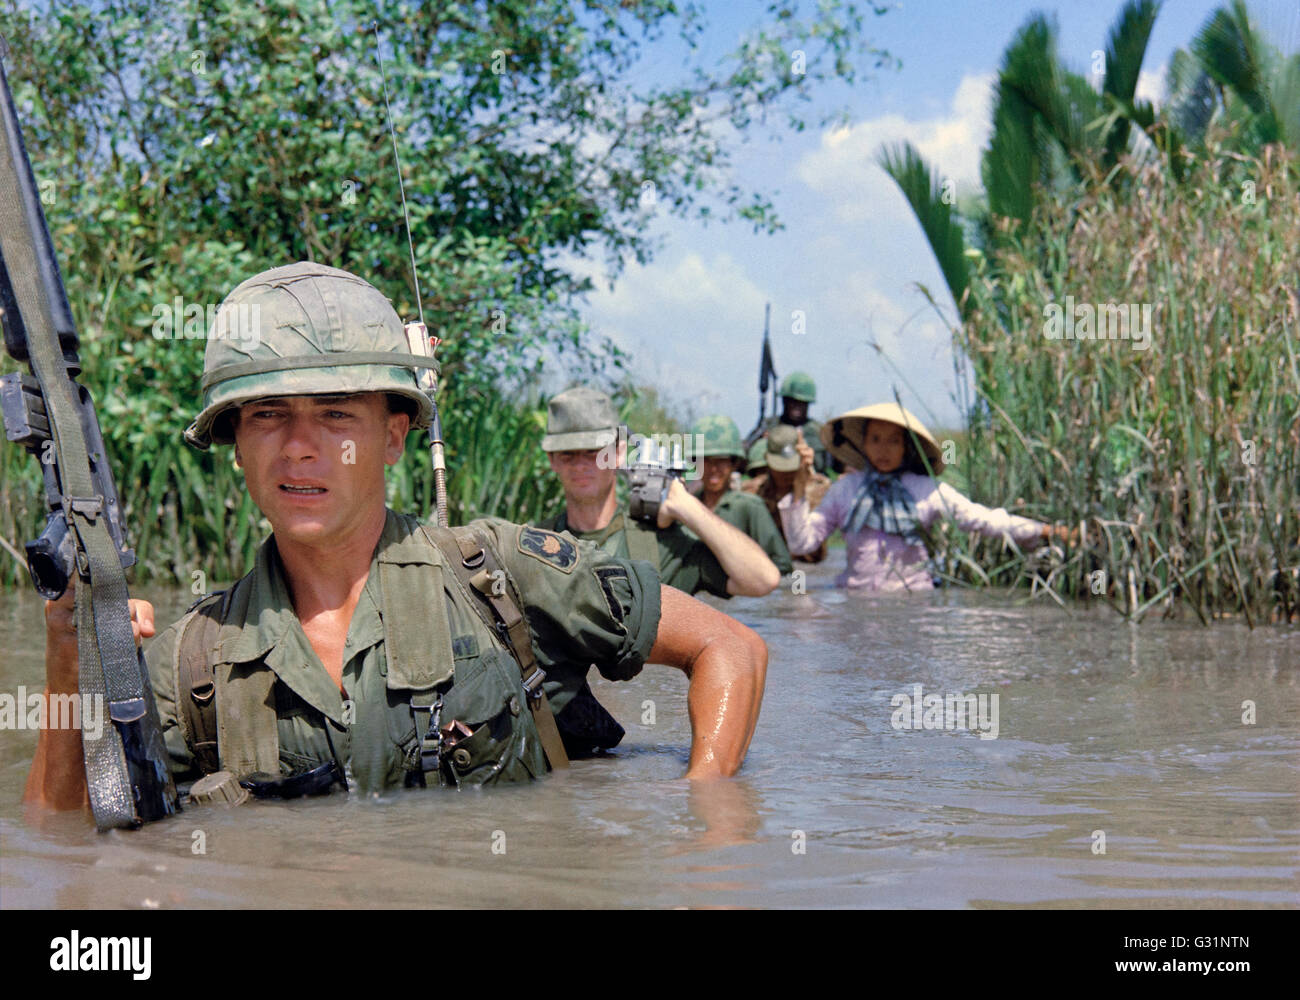 U.S Army soldier PFC Fred Greenleaf, with C Company, 3rd Battalion, 7th Infantry division, 199th Light Infantry Brigade, crosses a deep irrigation canal along with members of the 5th ARVN Ranger Group enroute to a Viet Cong controlled village during operation Rang Dong November 21, 1967 in Cat Lai , South Vietnam. Stock Photo